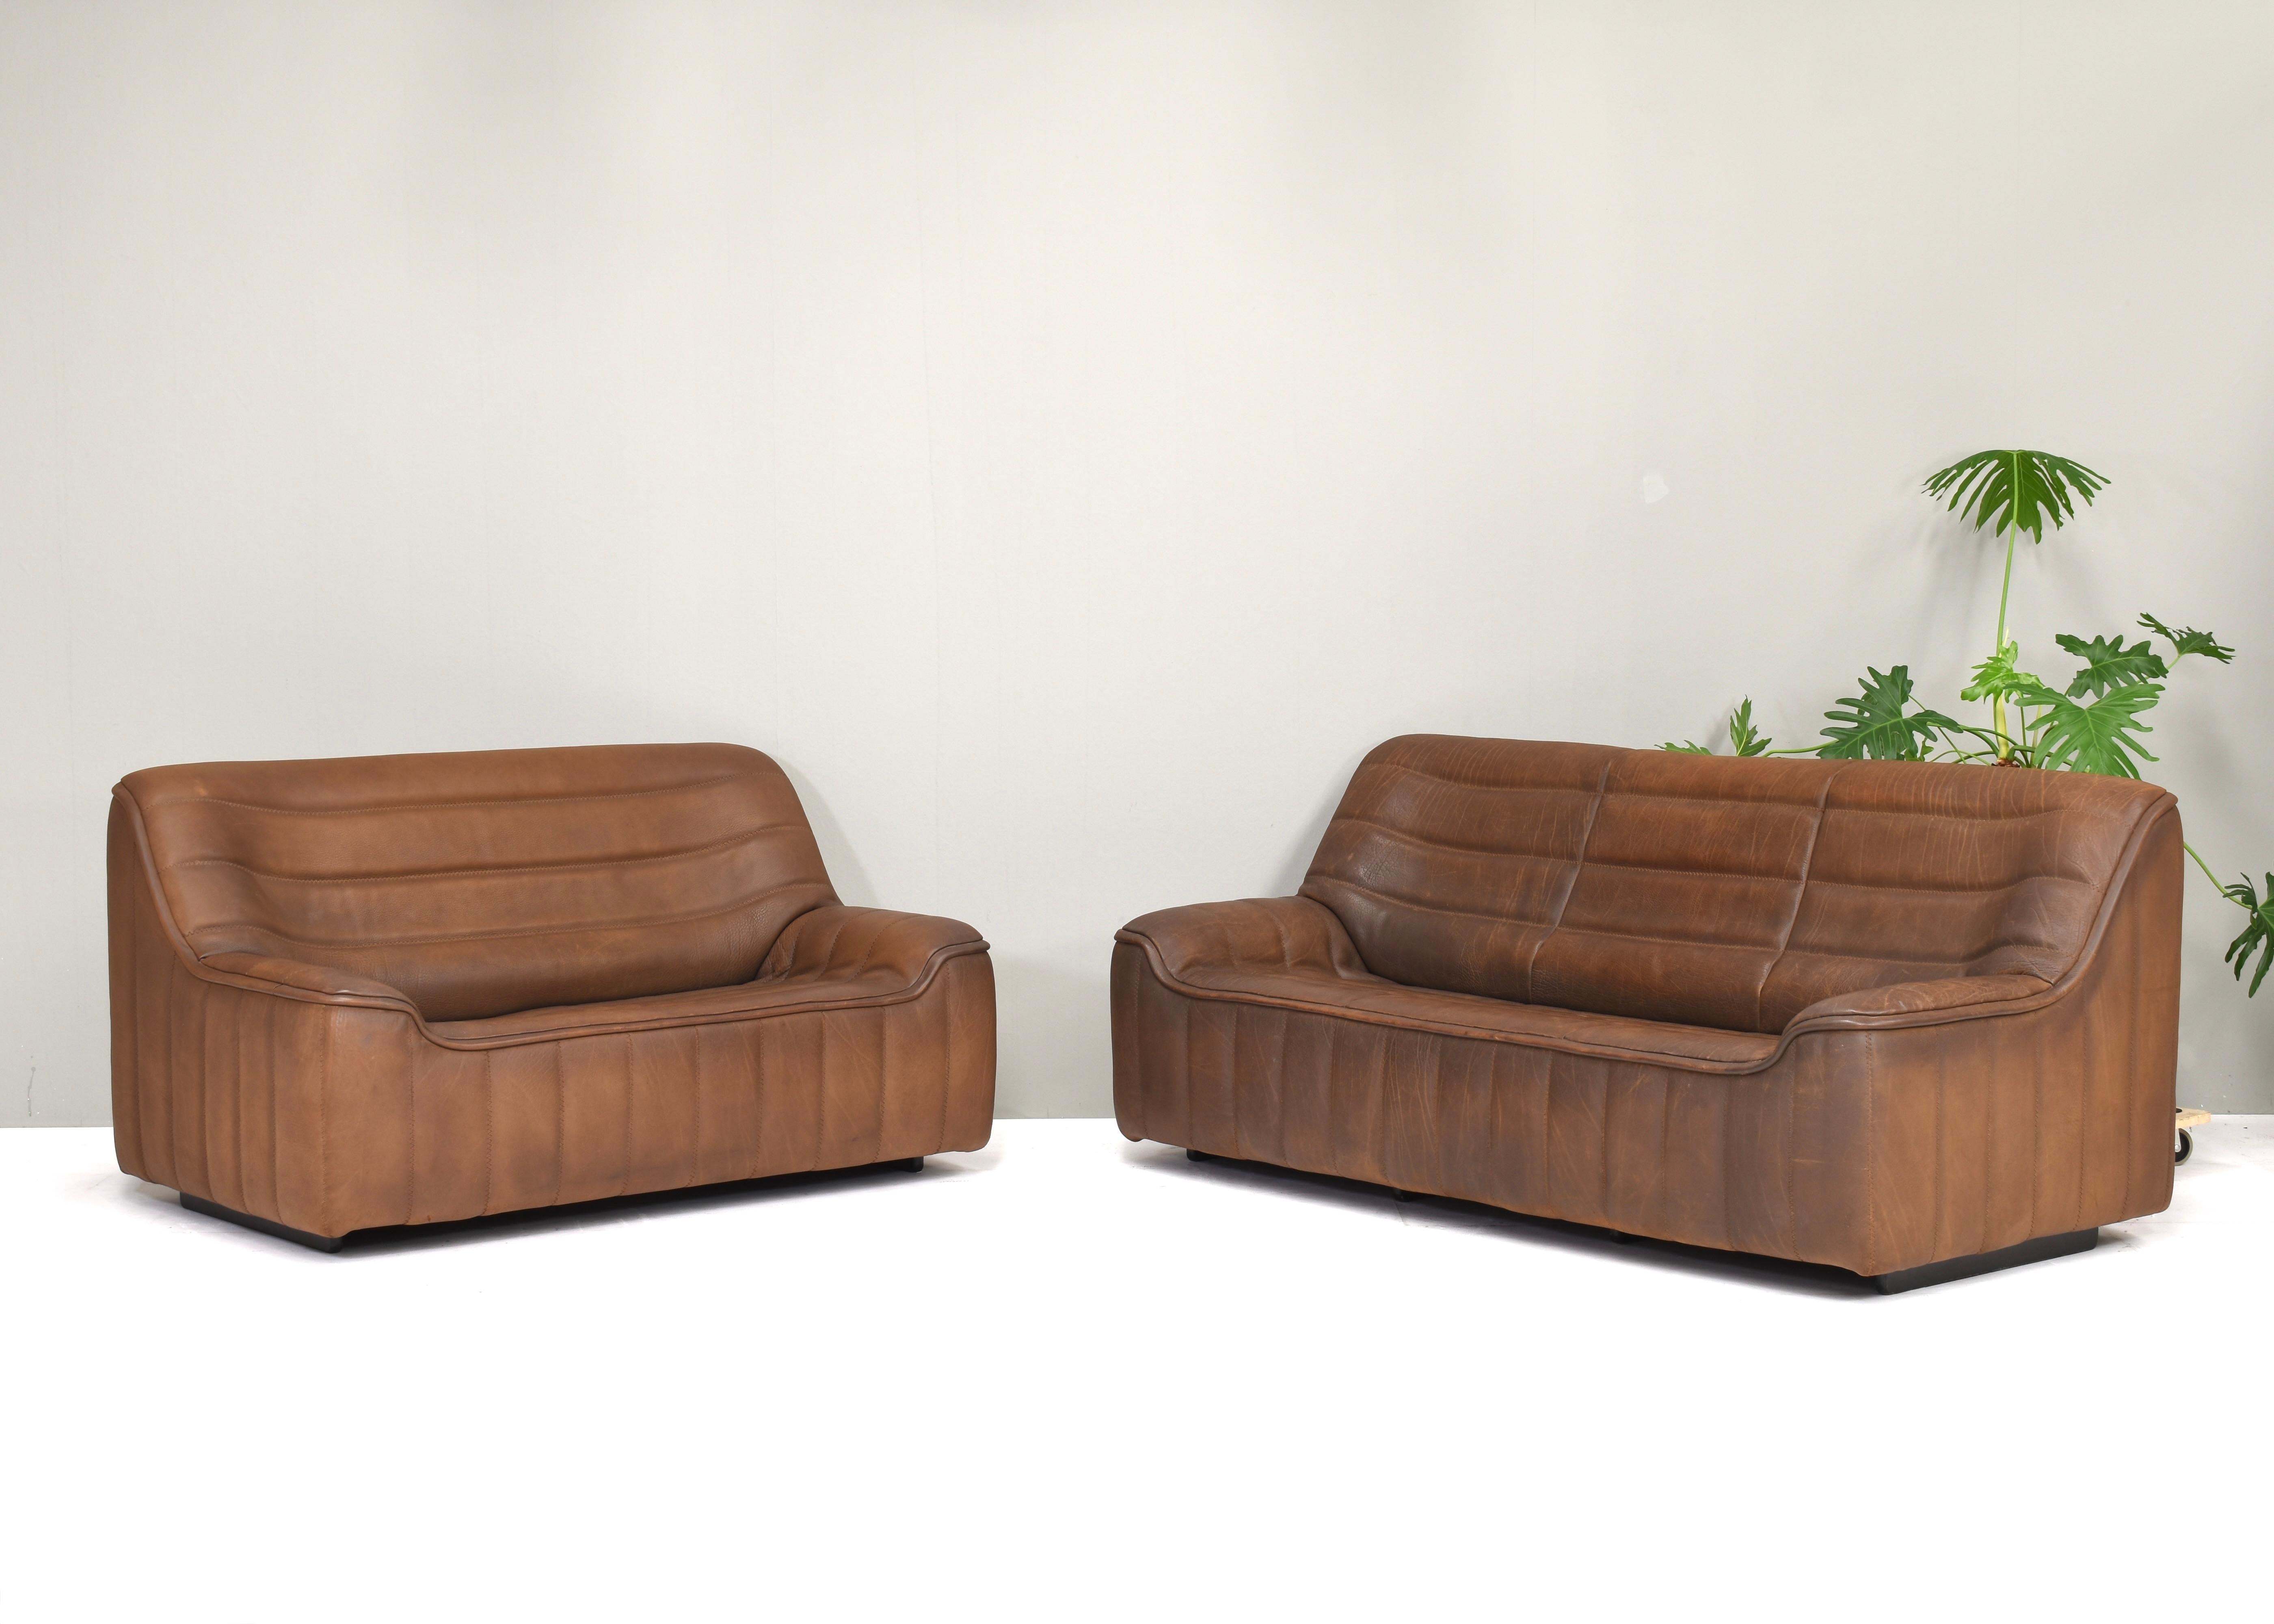 De Sede DS-84 Living room set in Tan Buffalo leather – Switzerland, circa 1970 For Sale 7